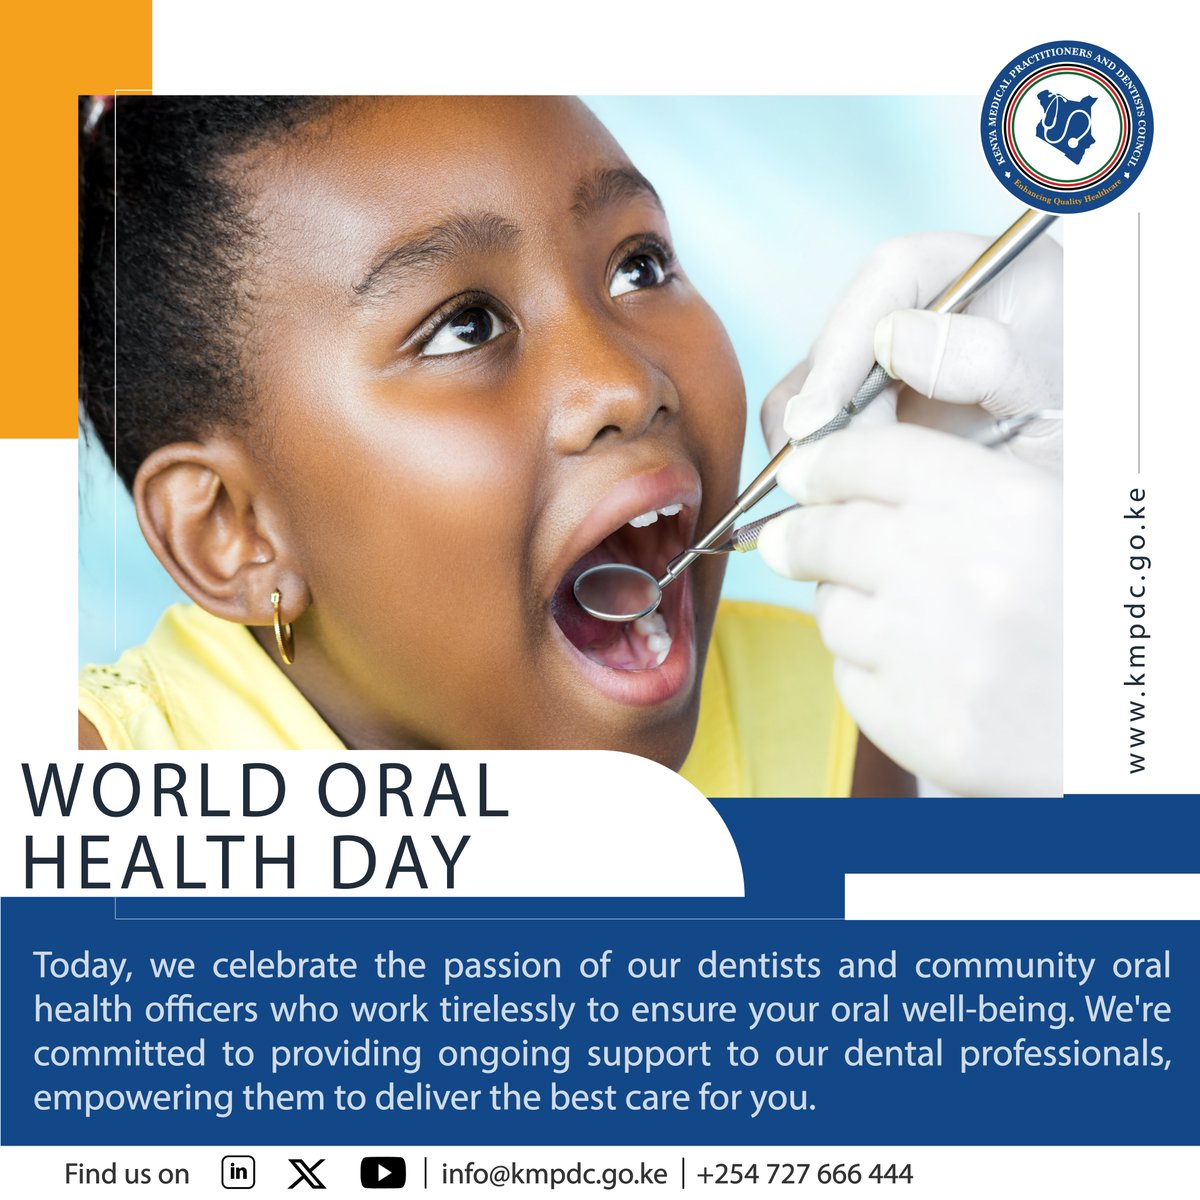 Today, we celebrate the passion of our dentists and community oral health officers who work tirelessly to ensure your oral well-being. We're committed to providing ongoing support to our dental professionals, empowering them to deliver the best care for you. #WorldOralHealthDay…